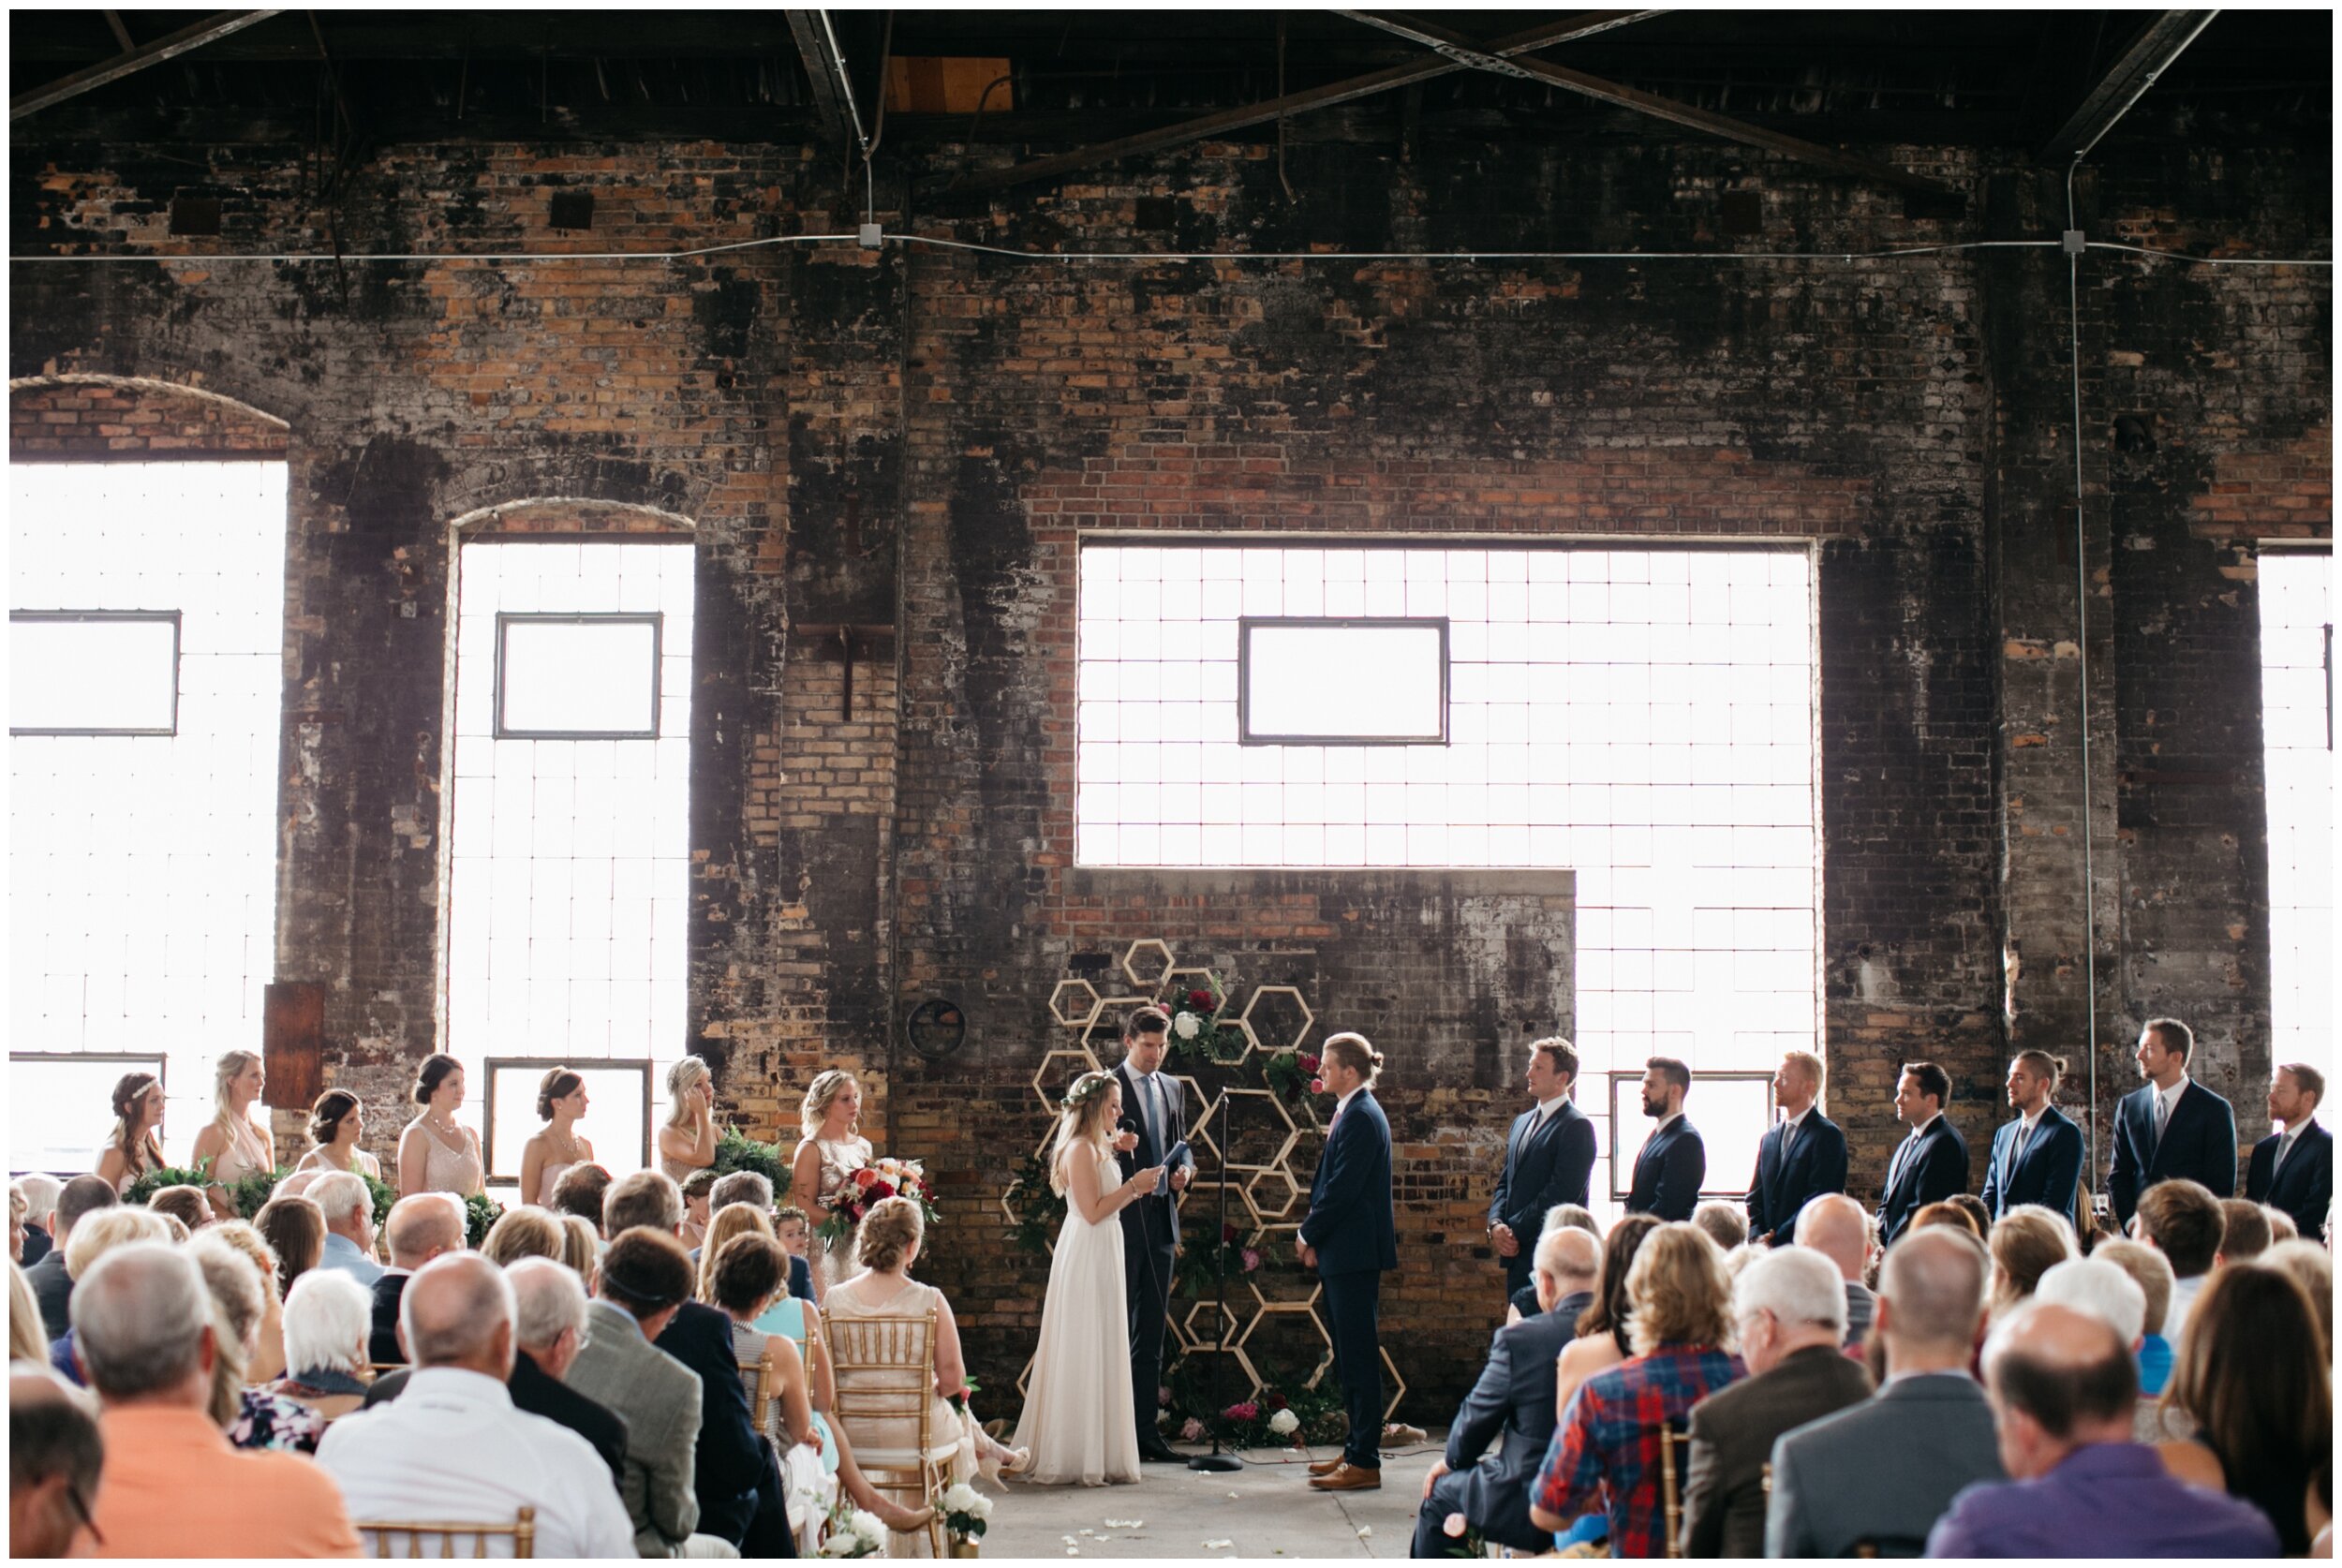 Industrial wedding ceremony inside warehouse at the Northern Pacific Center in Brainerd, Minnesota